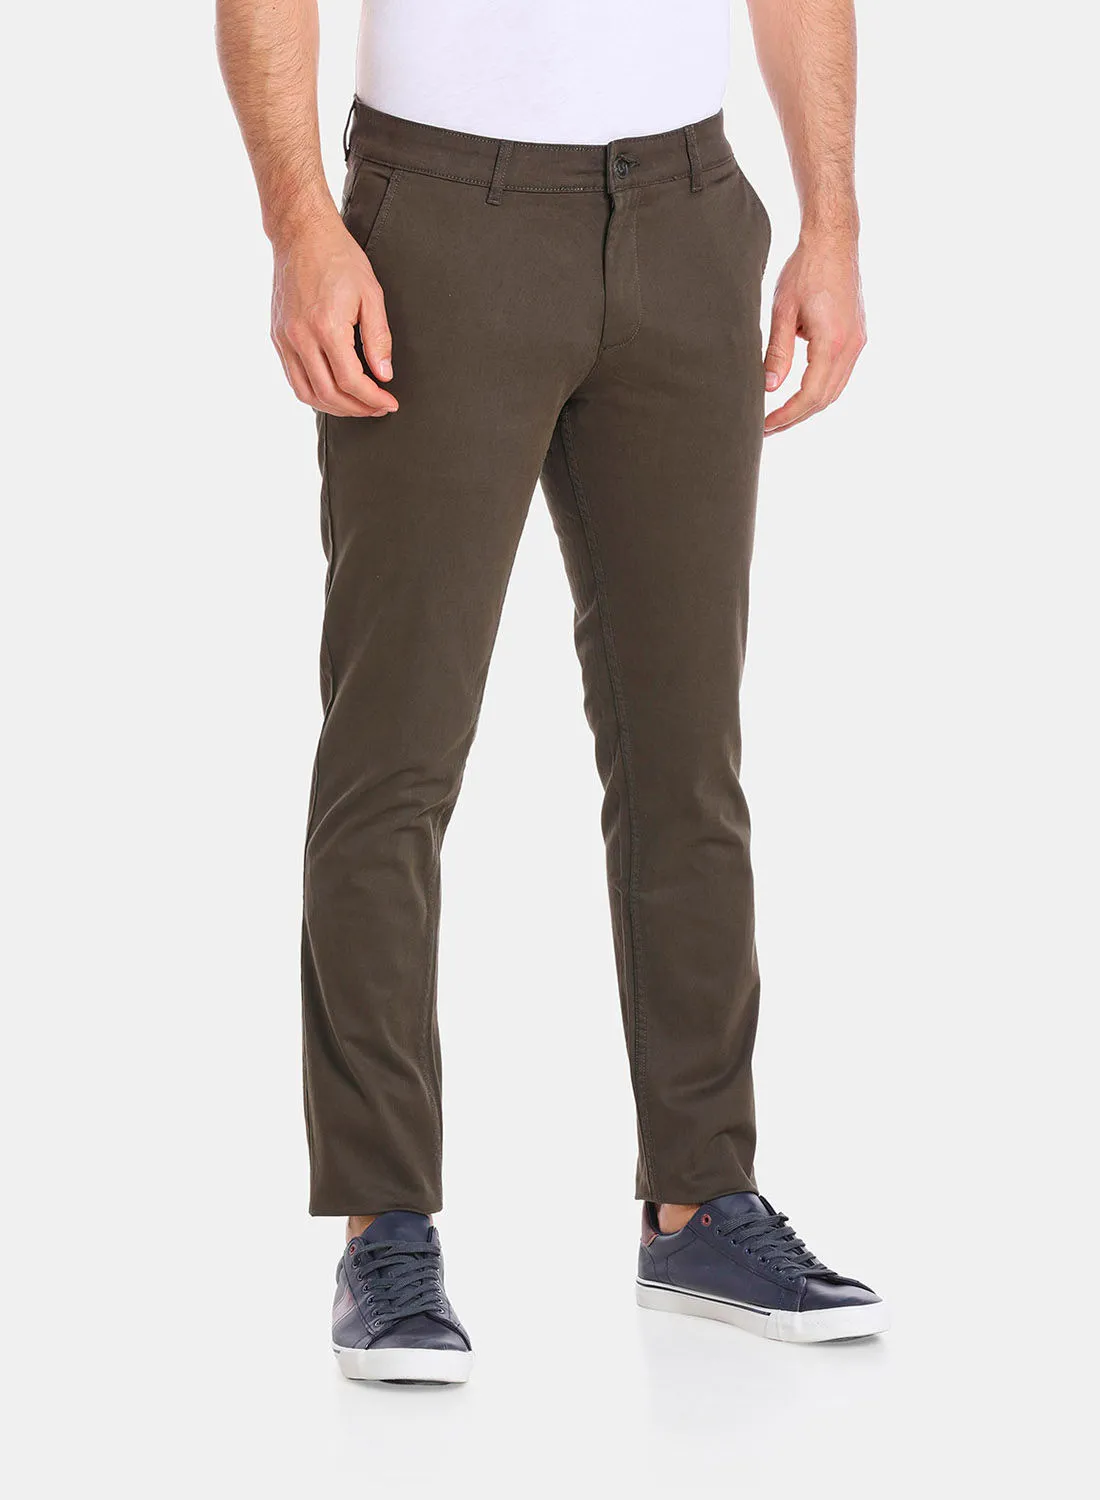 R&B Solid Slim Fit Full Length Chinos Olive Green